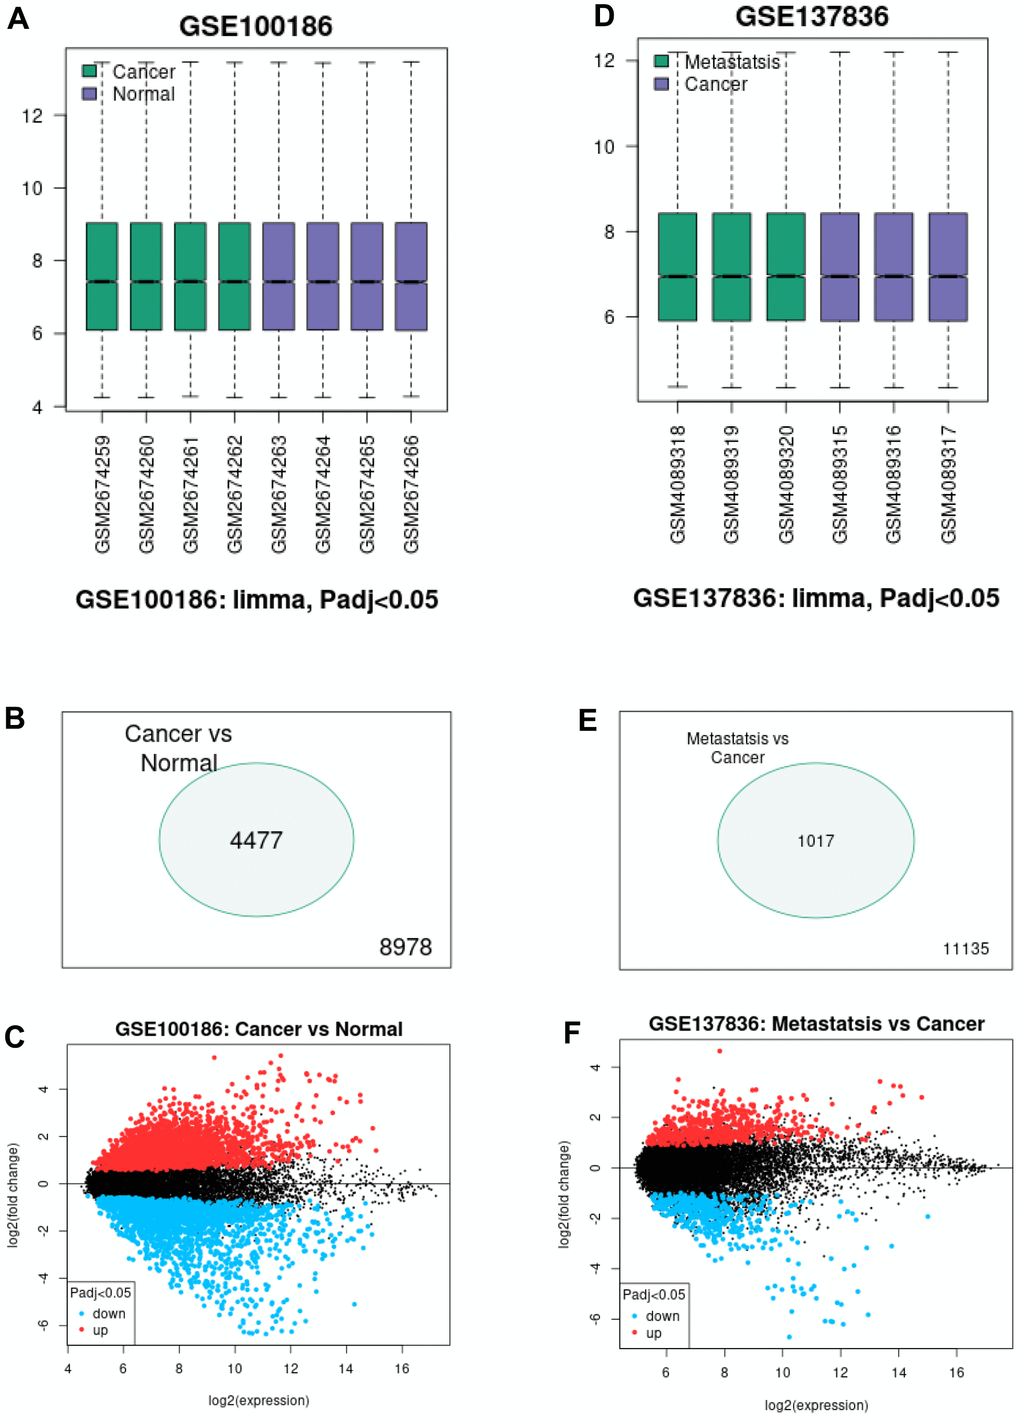 Screening of differentially expressed circRNAs (DECs) associated with malignant metastasis of ccRCC. (A) The normalization of samples in GSE100186 analyzed by GEO2R online tool. (B) The significant DECs between ccRCC cancer tissues and normal tissues. (C) The volcano plot of the DECs between ccRCC cancer tissues and normal tissues in GSE100186. (D) The normalization of samples in GSE137836 analyzed by GEO2R online tool. (E) The significant DECs between ccRCC cancer tissues and metastatic cancer tissues. (F) The volcano plot of the DECs between ccRCC cancer tissues and metastatic cancer tissues in GSE137836.